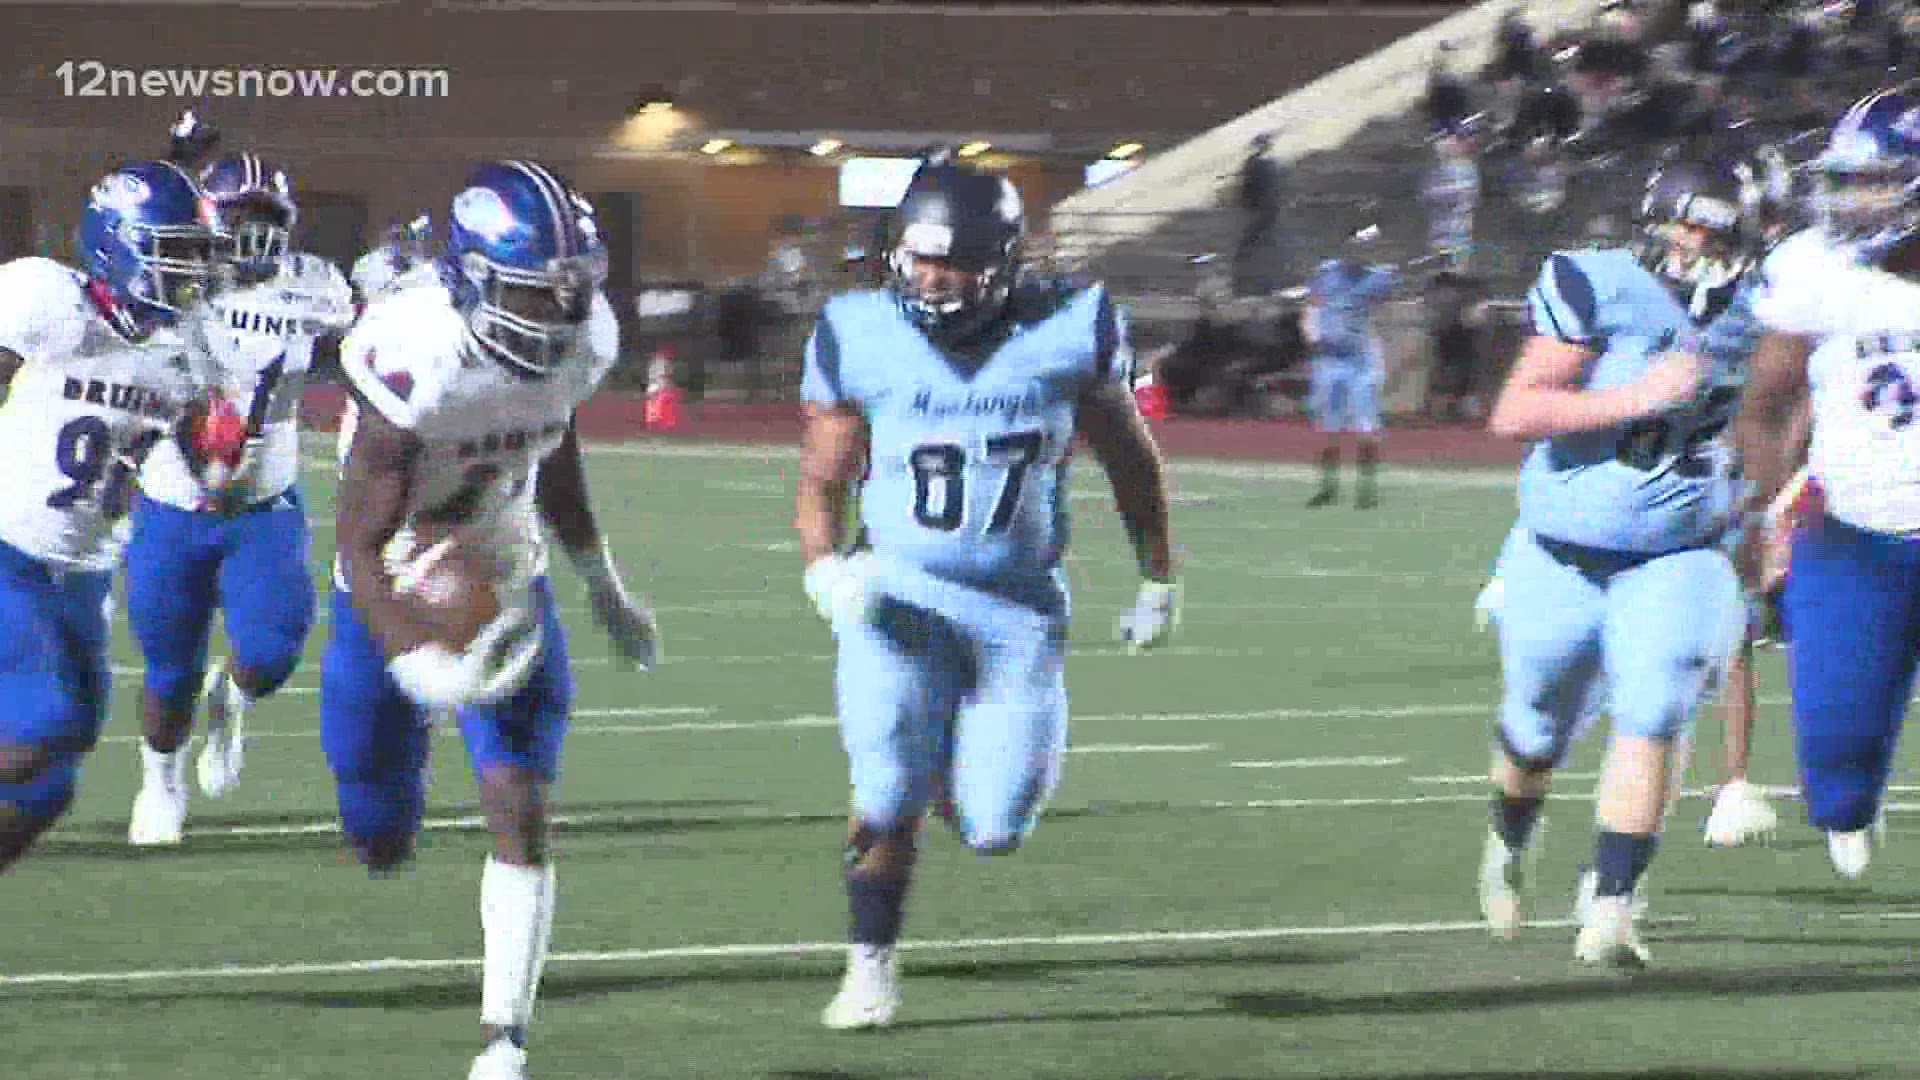 Bruins holds off Kingwood to improve to (2-1) in 21-6A